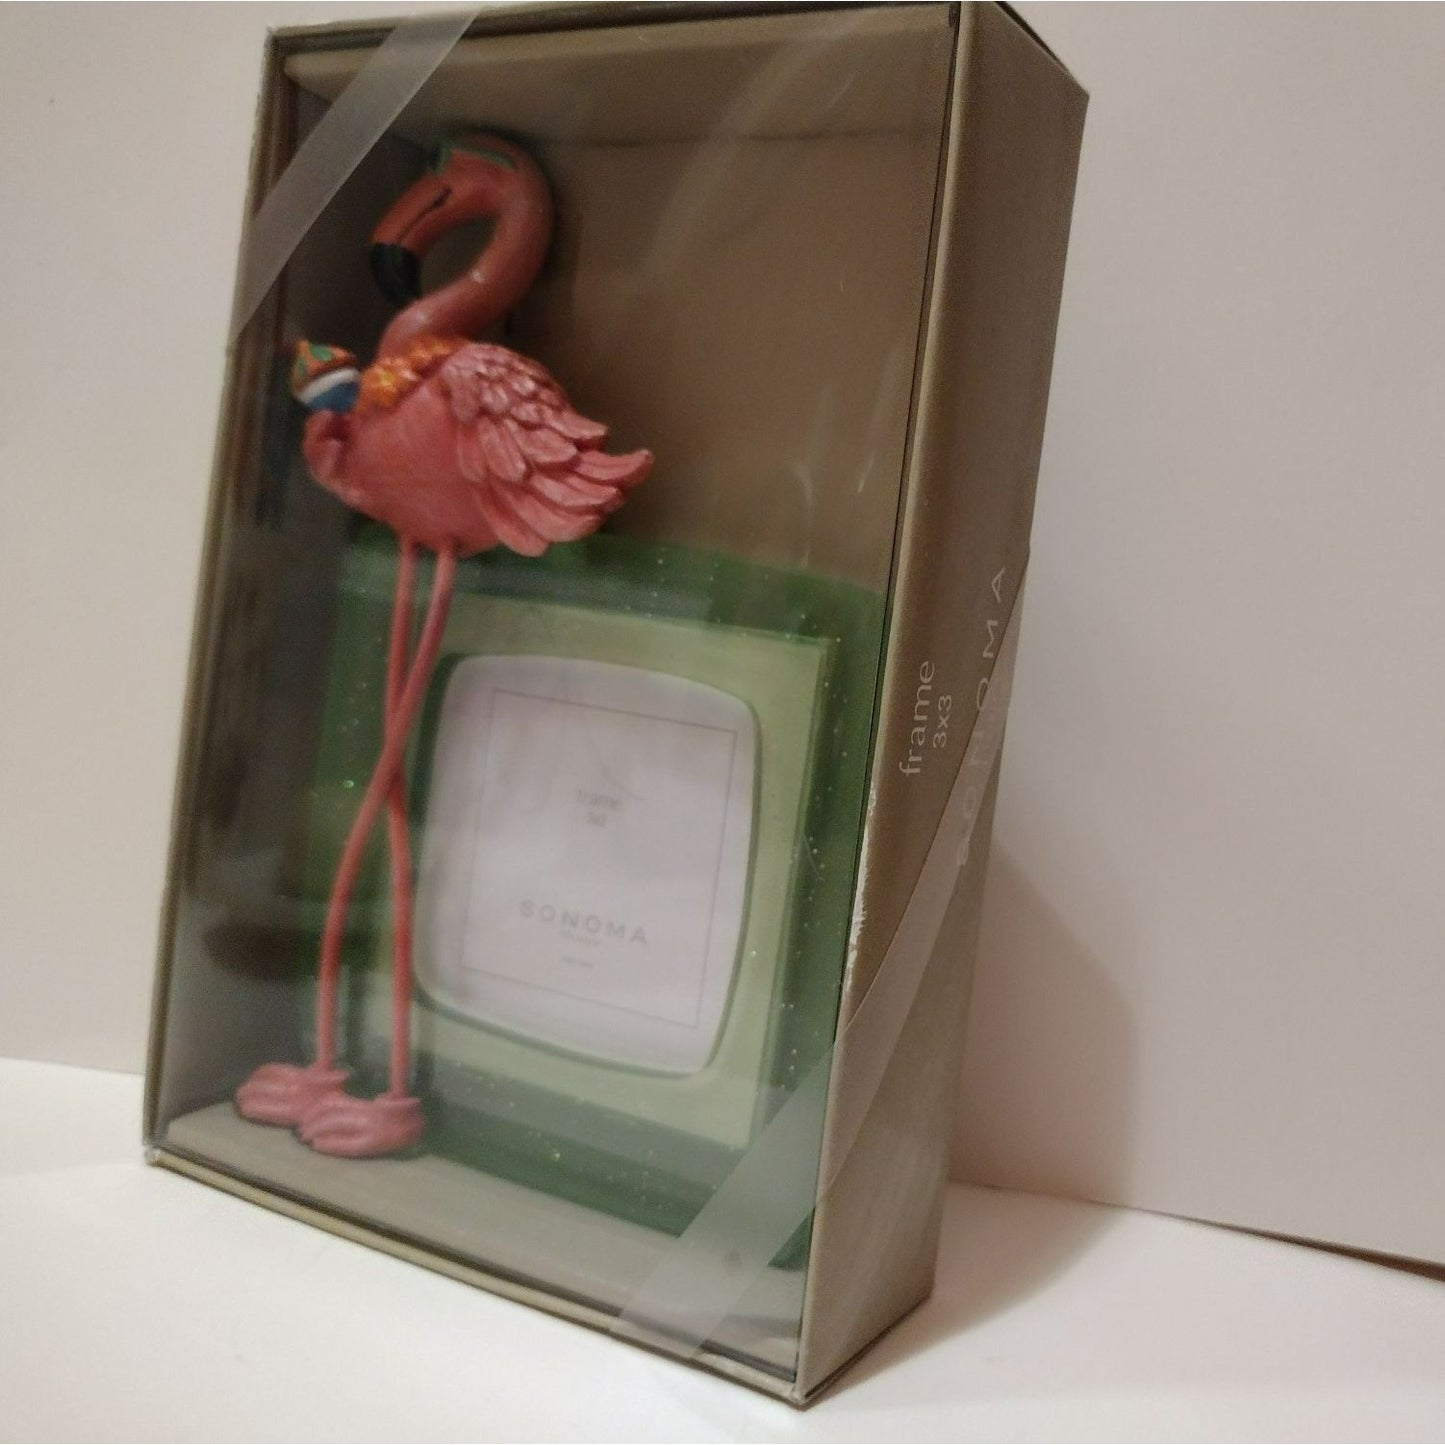 3D Flamingo Picture Frame, Sonoma, NEW in Box, Fits 3x3 Photo, Beachy Tropical